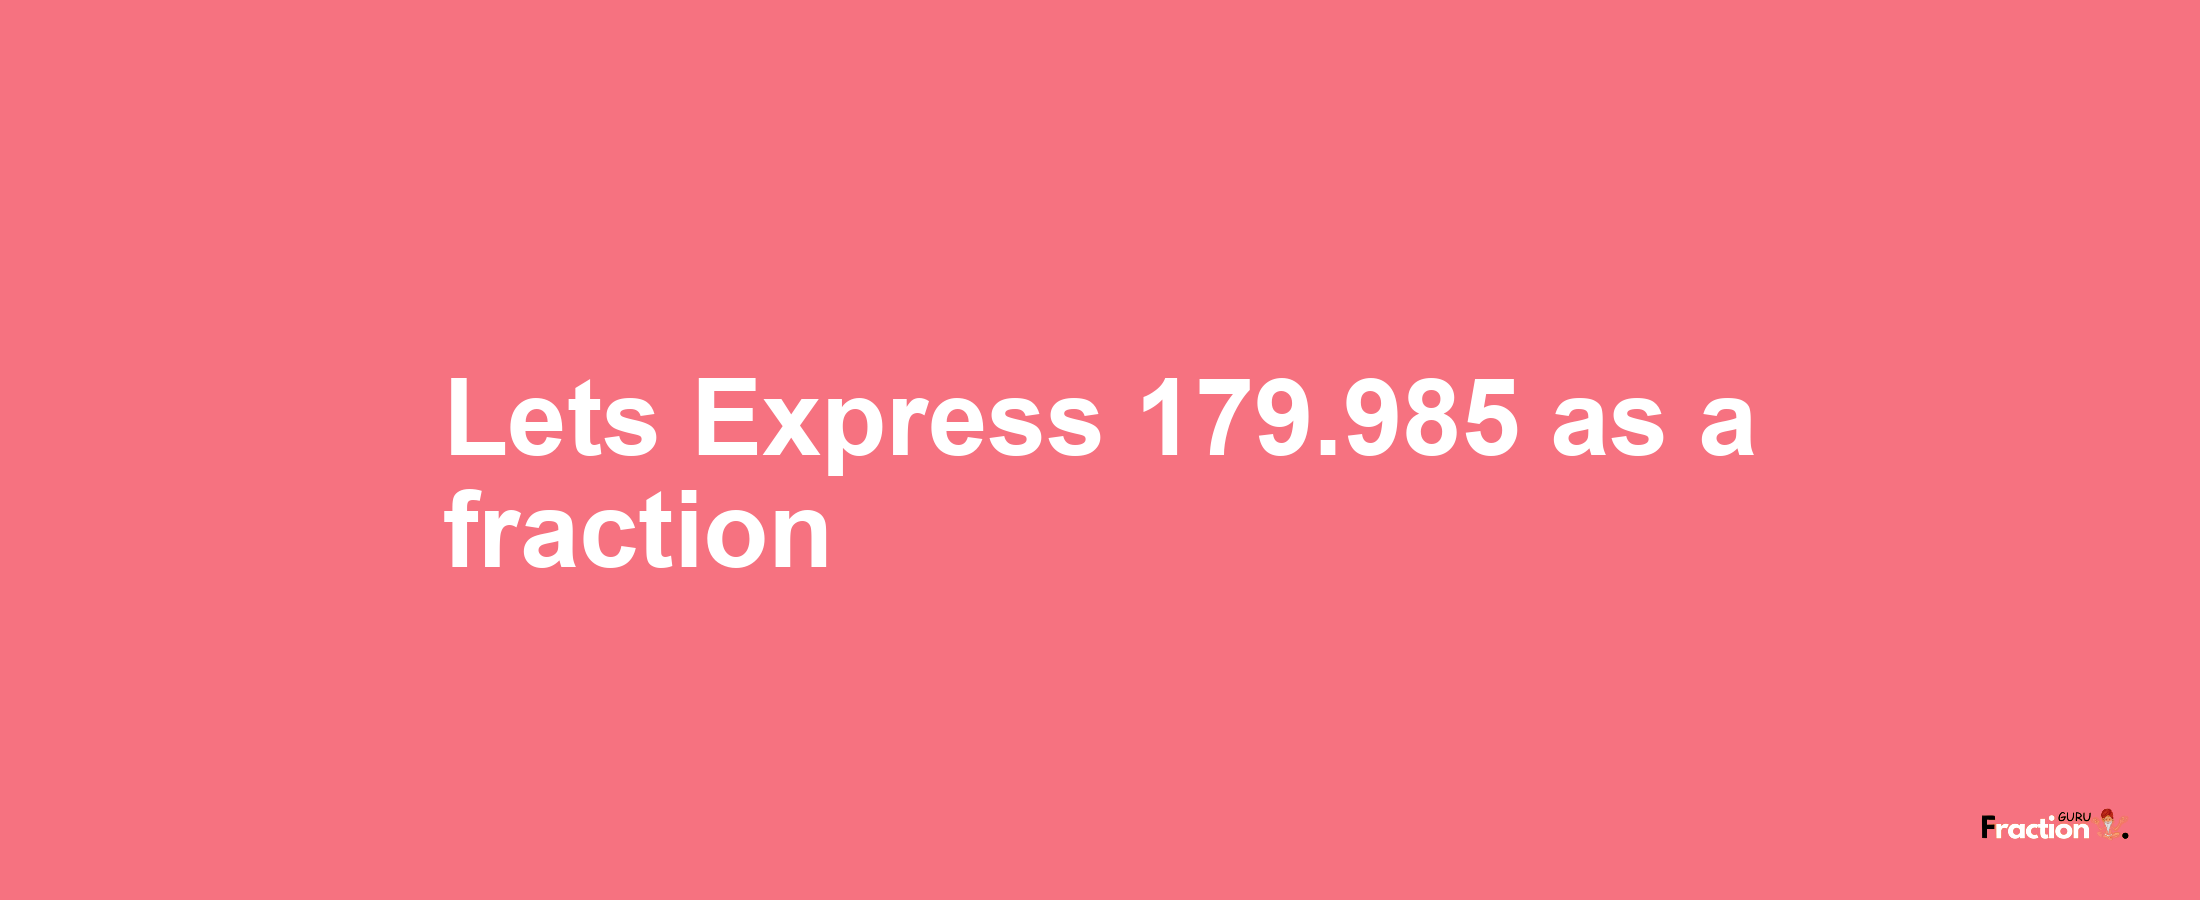 Lets Express 179.985 as afraction